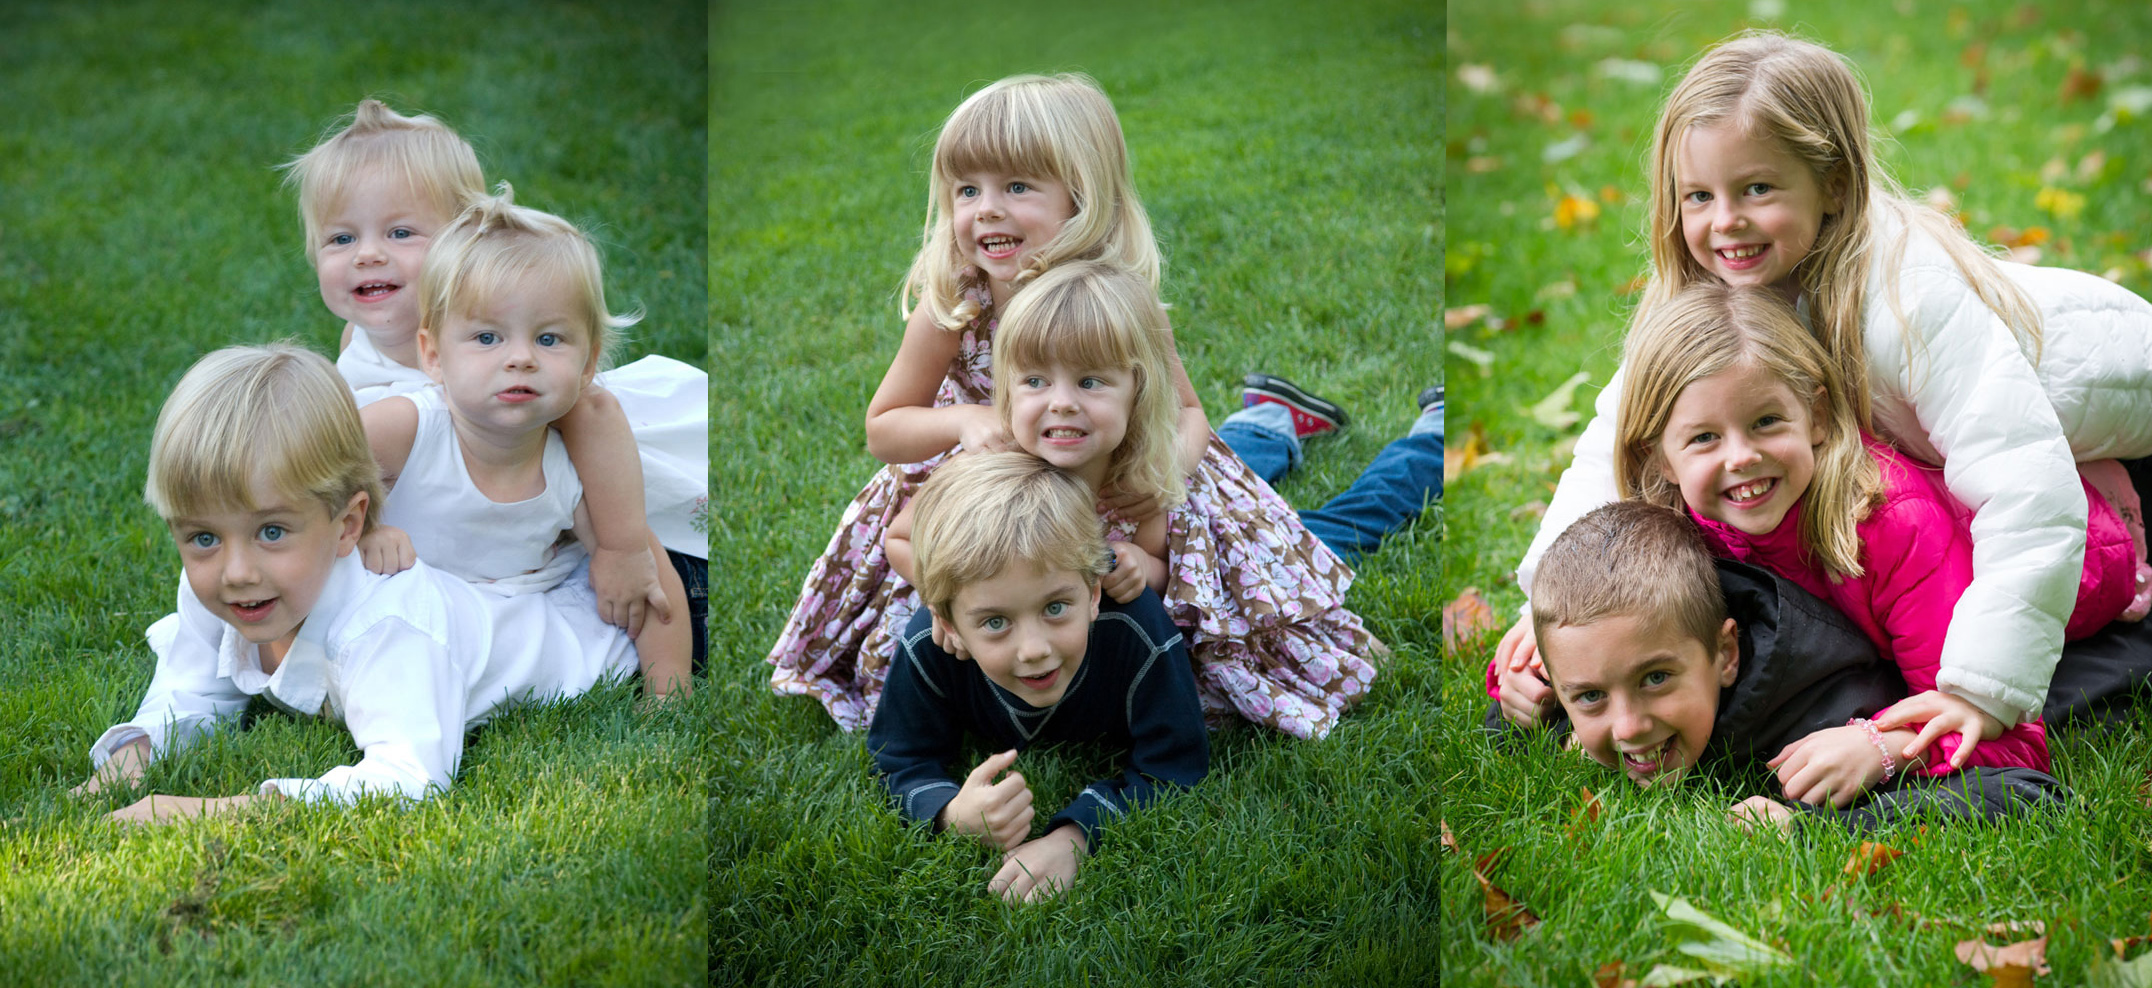 Sal, Josie and Chase Cerrell in 2007, 2009 and 2013.